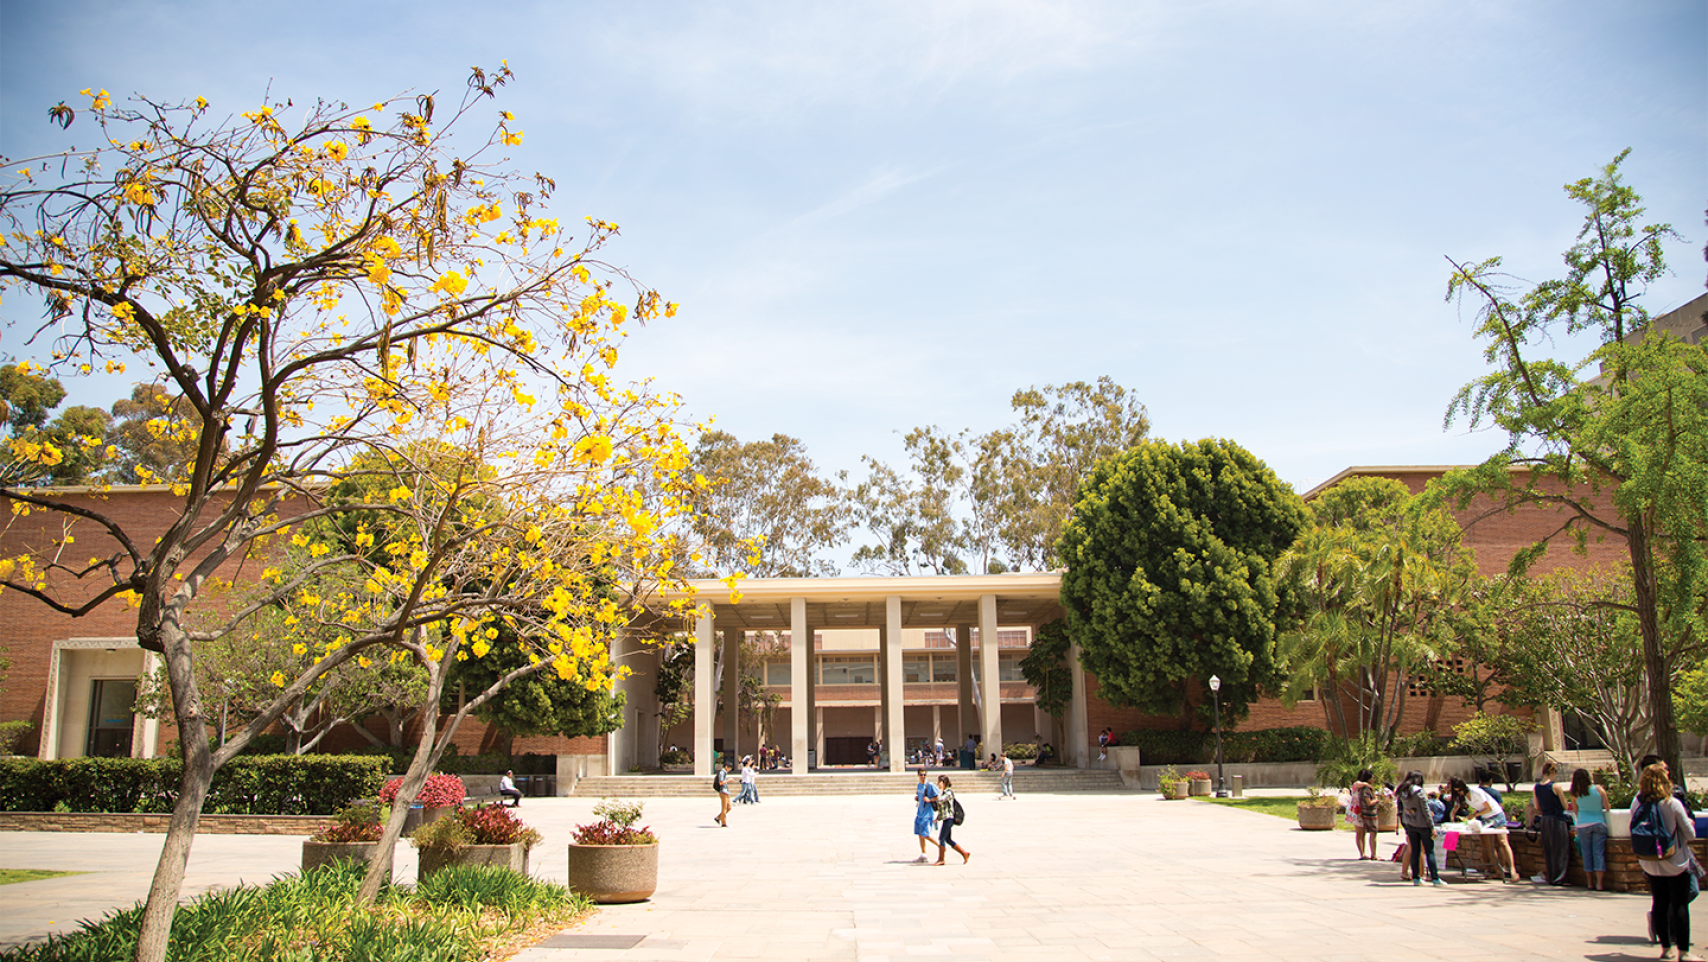 An image of the Court of Sciences at the south campus of UCLA